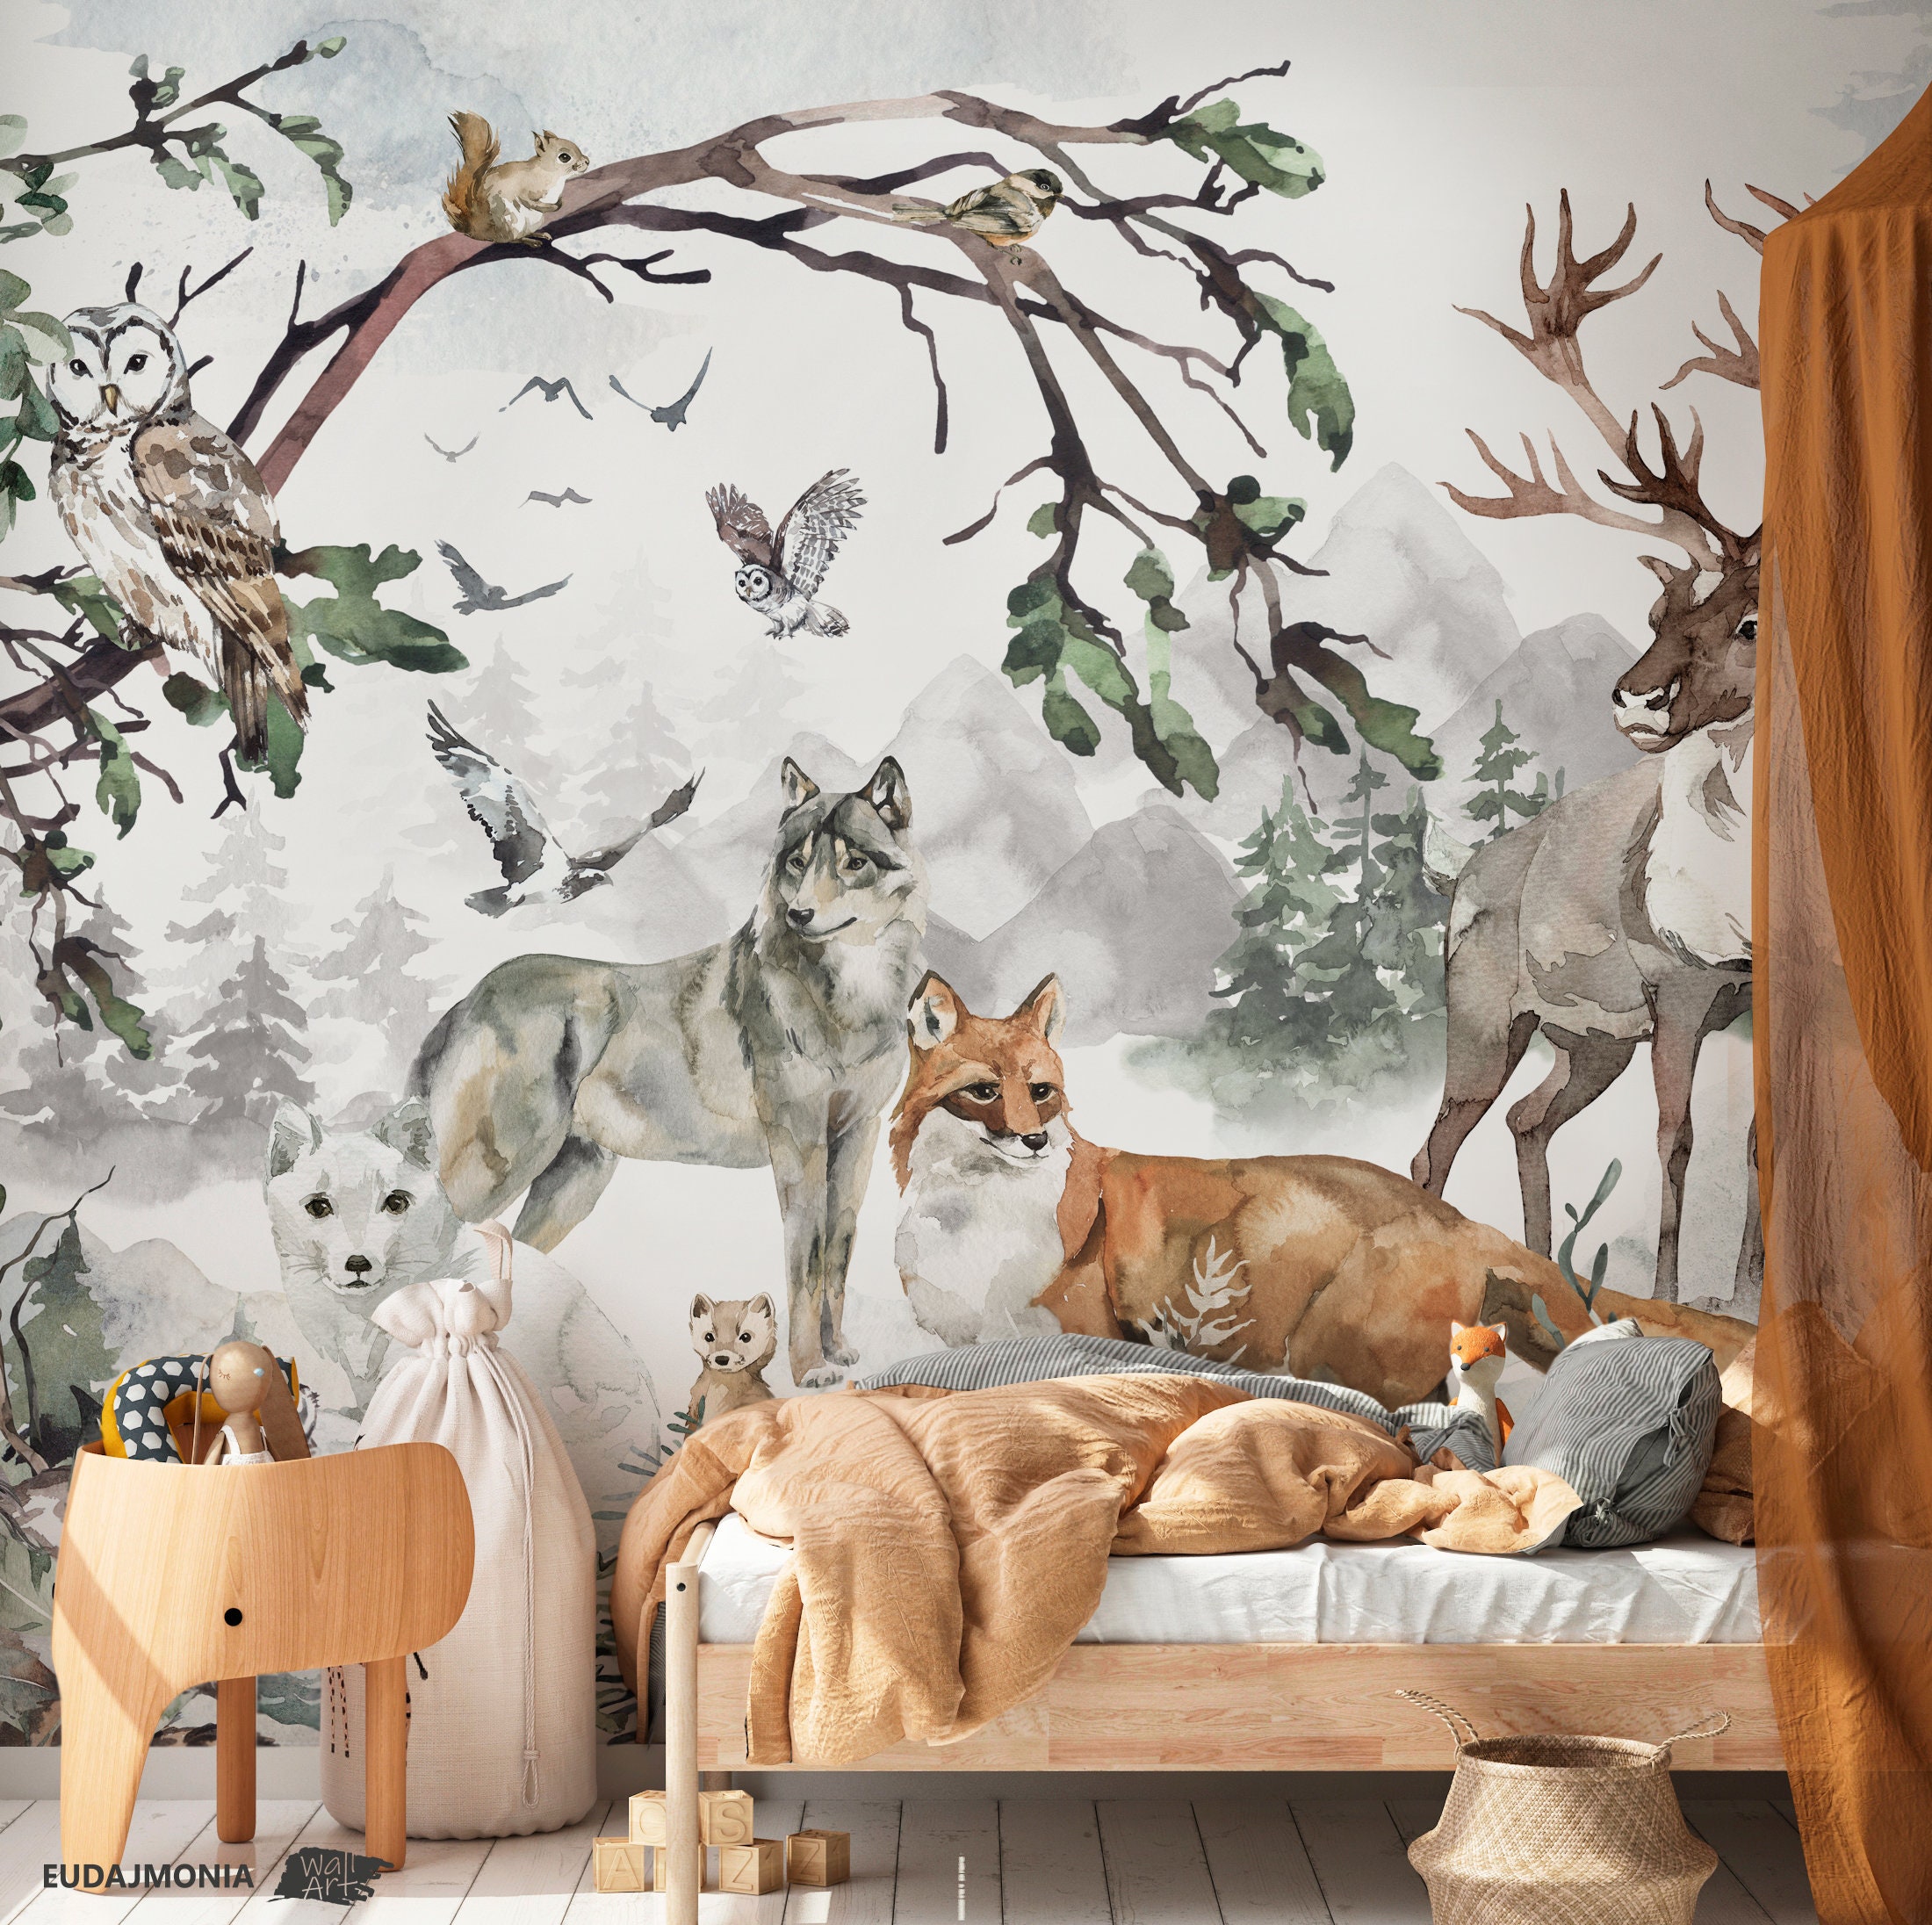 BACKWOODS / Forest Wallpaper Woodland Animals Wall Mural - Etsy 日本